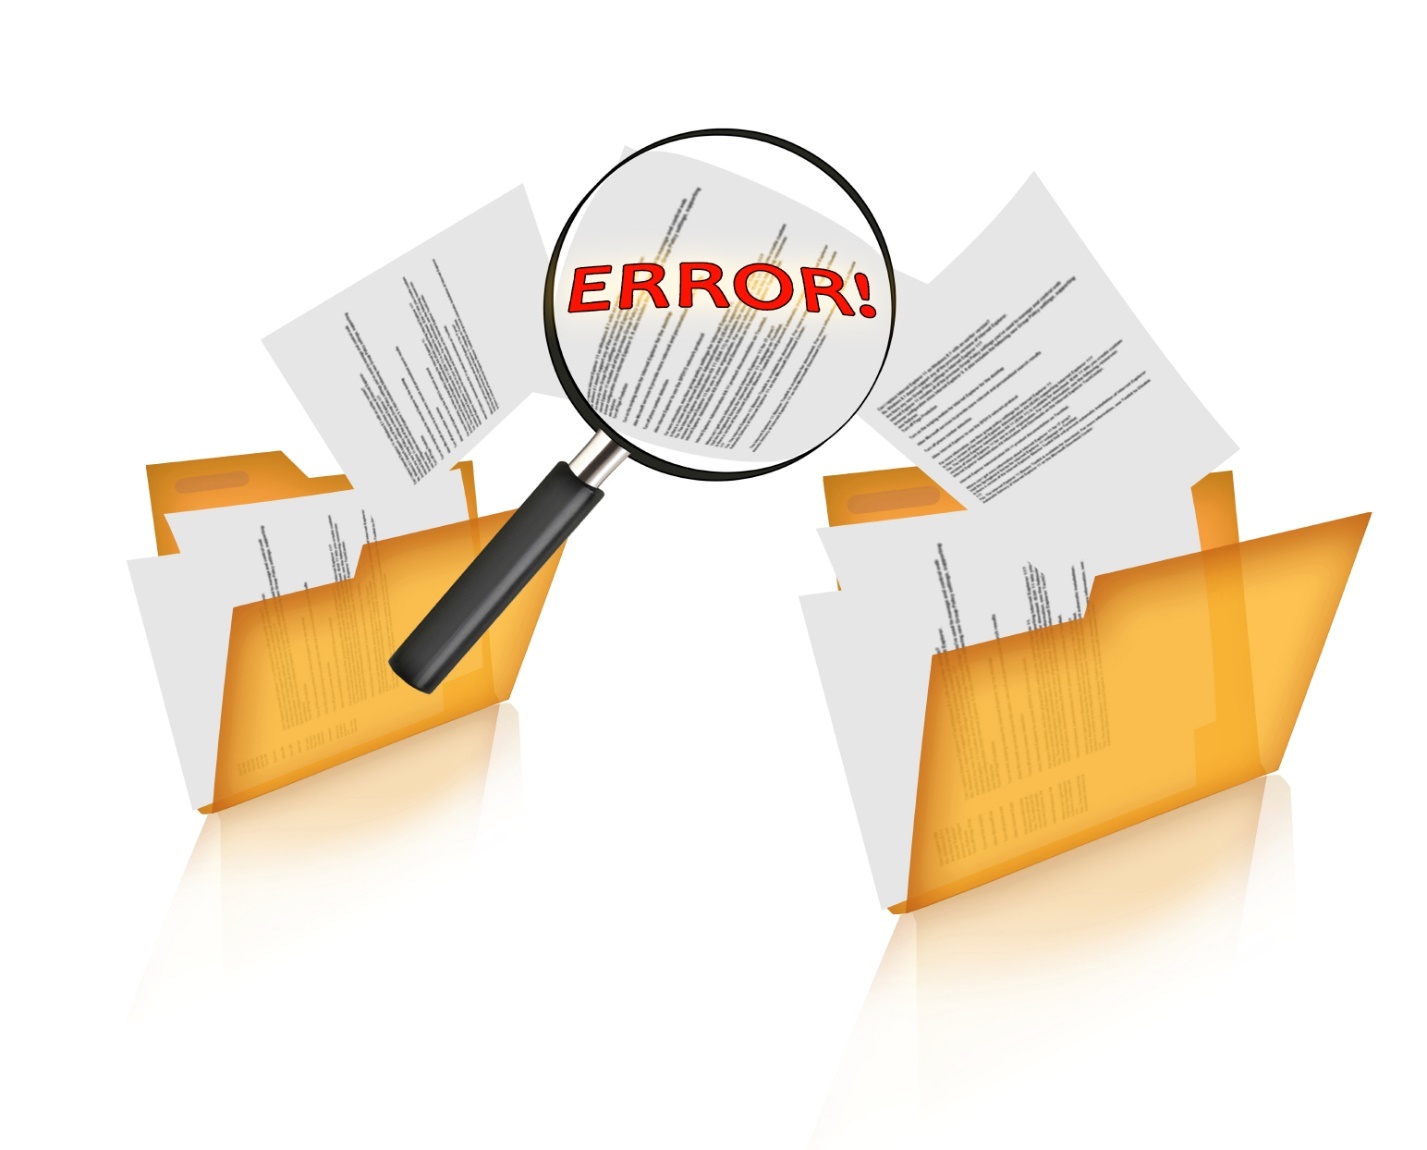 3 Common Provisional Patent Filing Mistakes